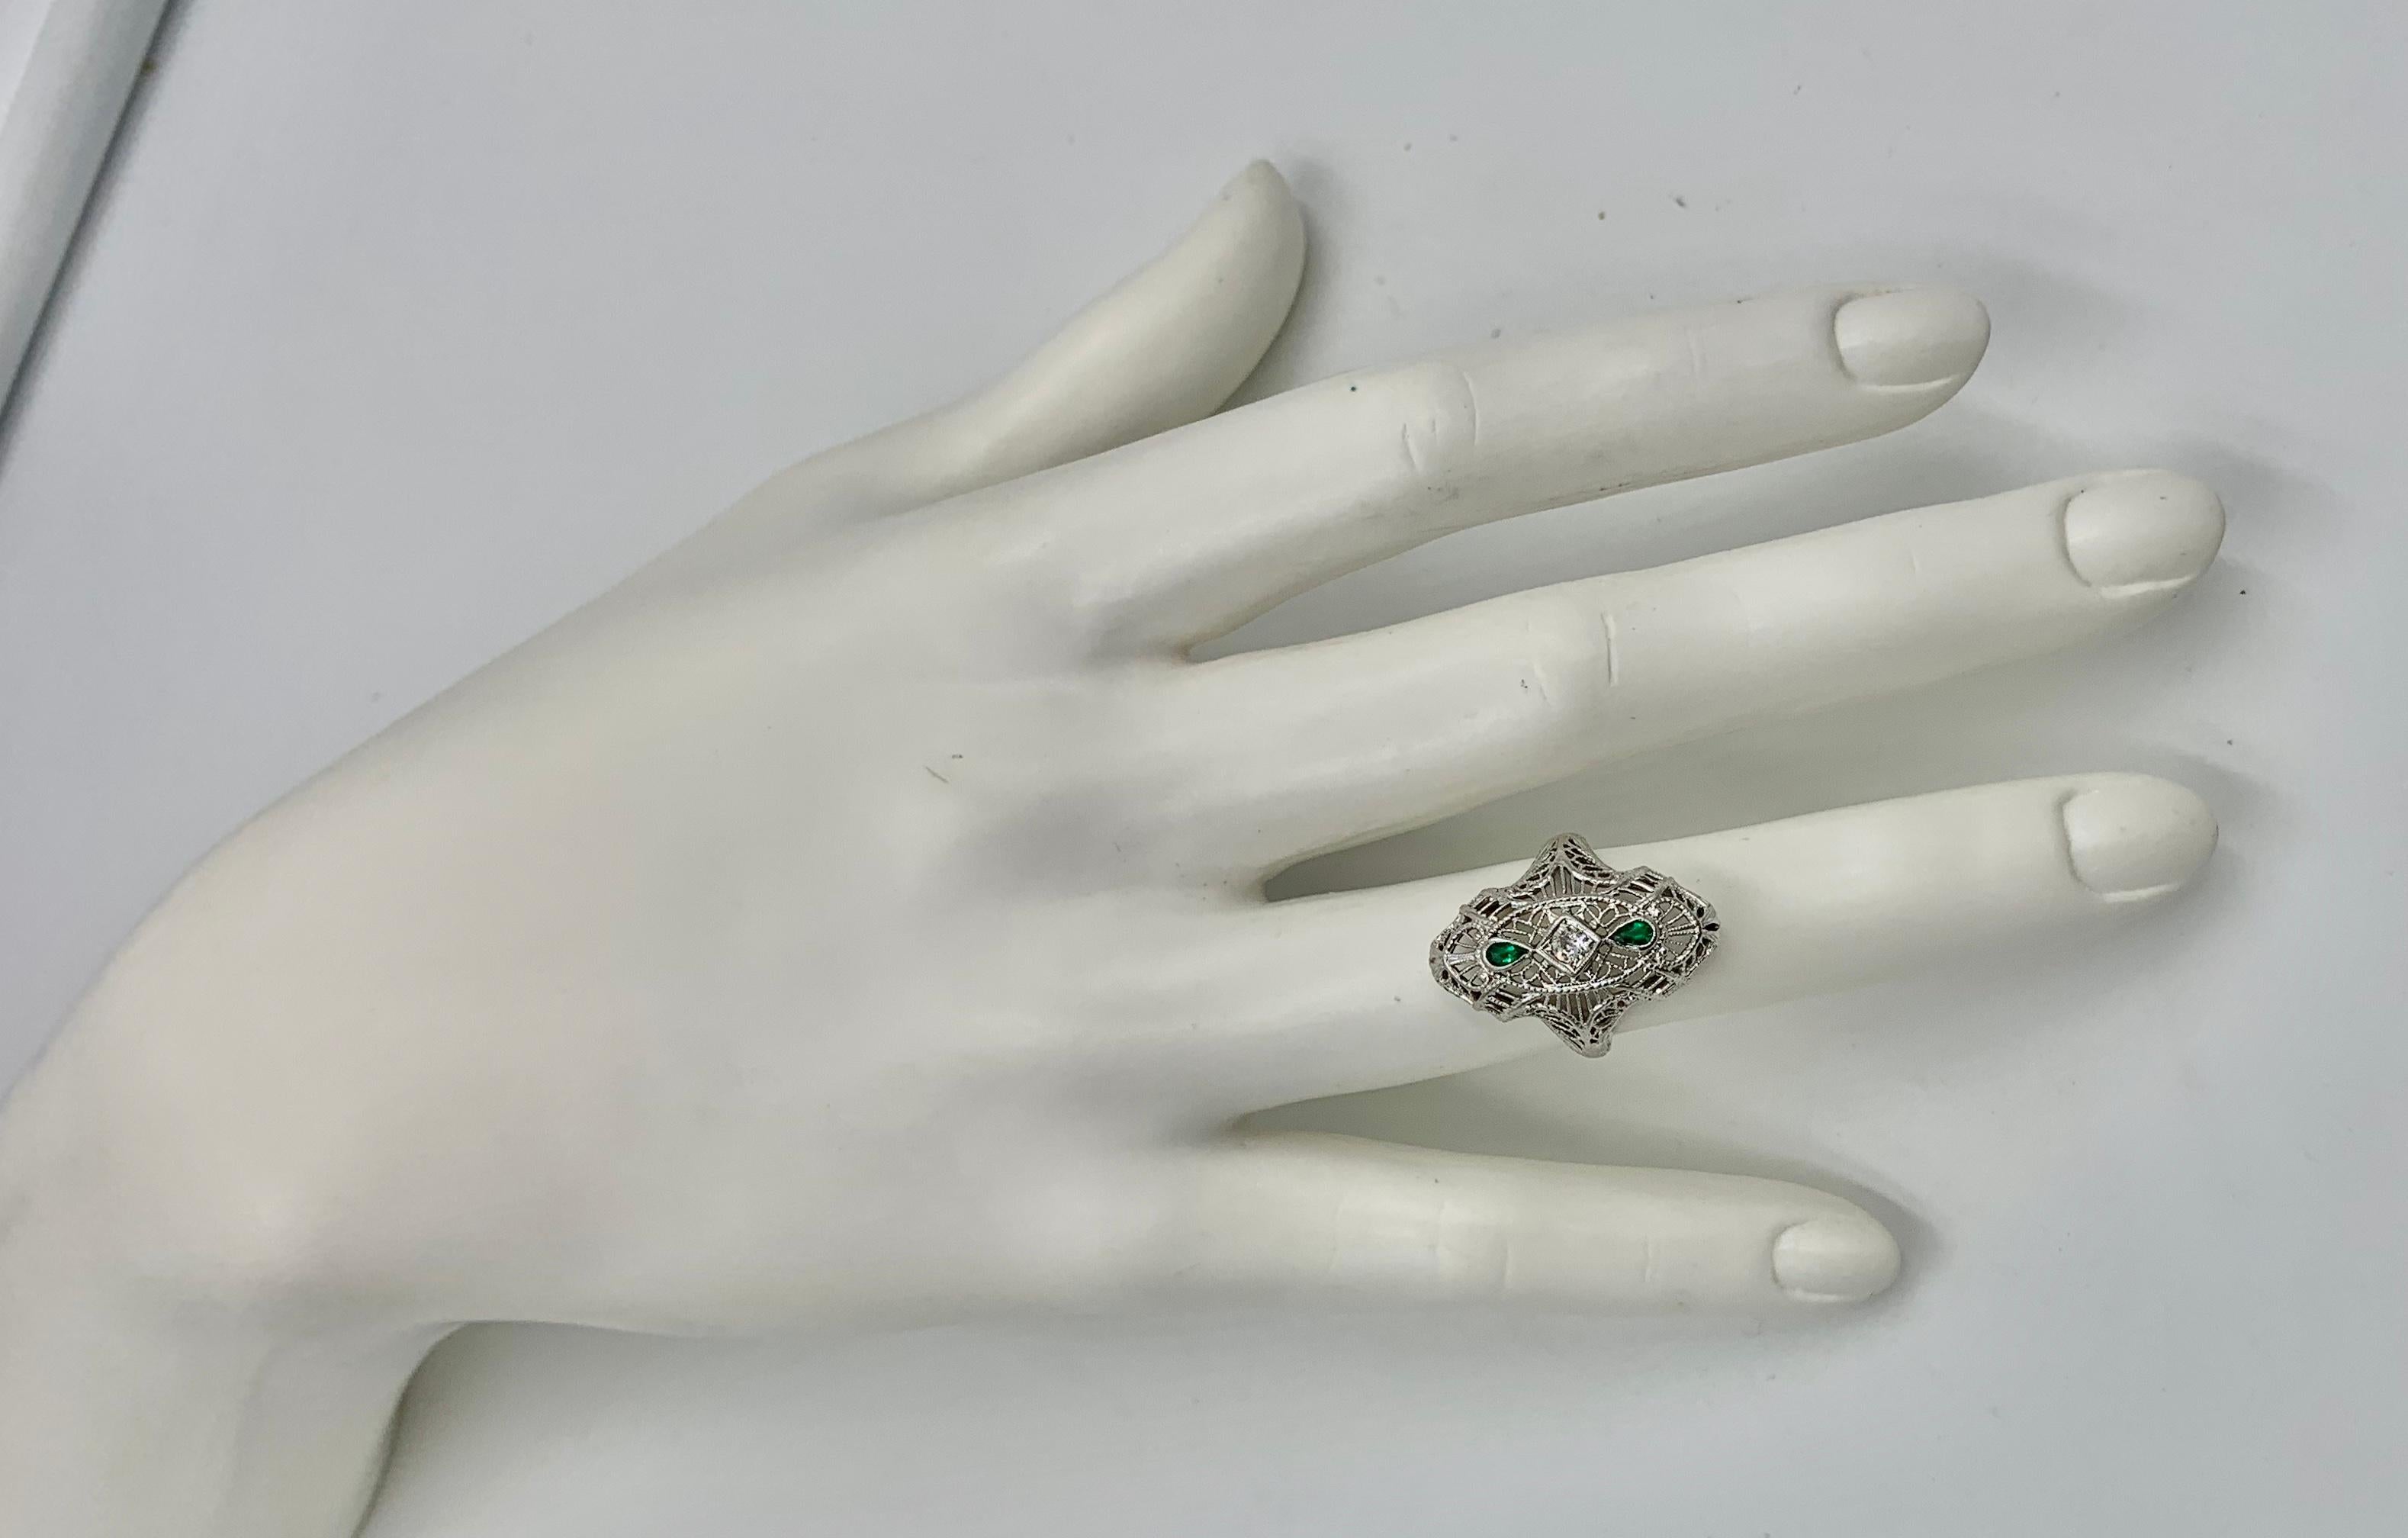 jackie kennedy engagement ring before and after